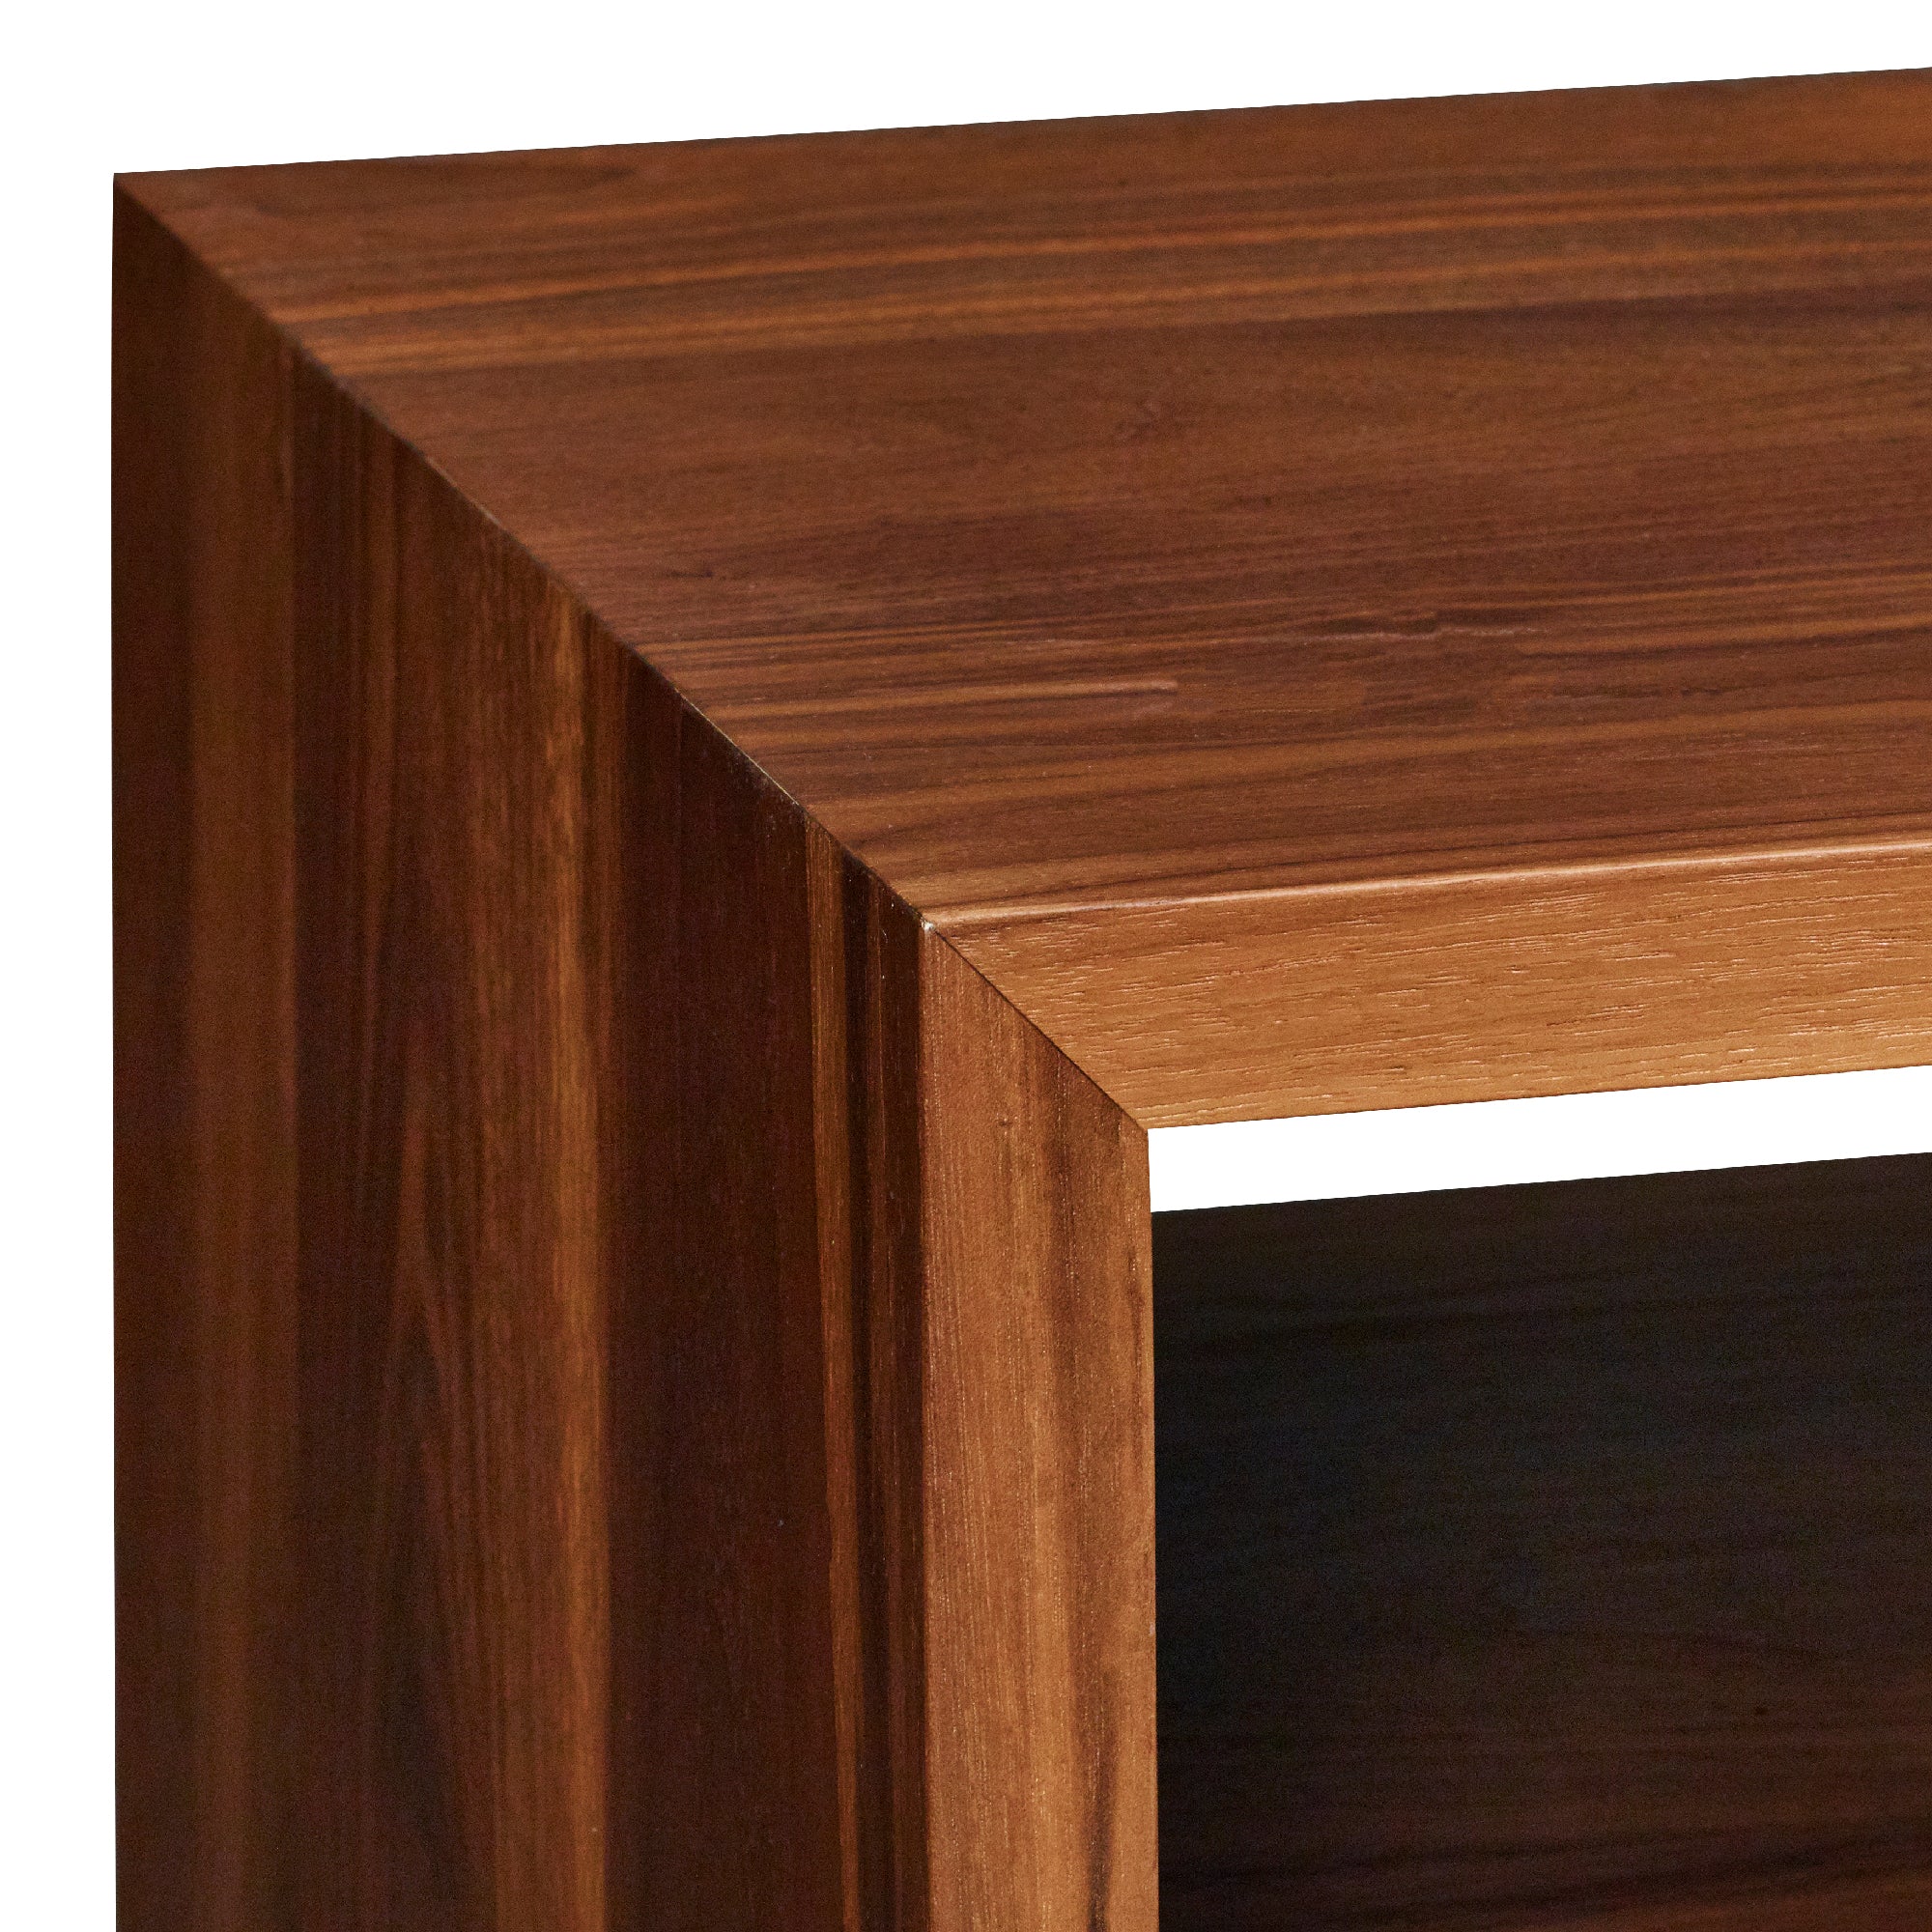 Detail of joinery on solid walnut wood Navarend Media Case